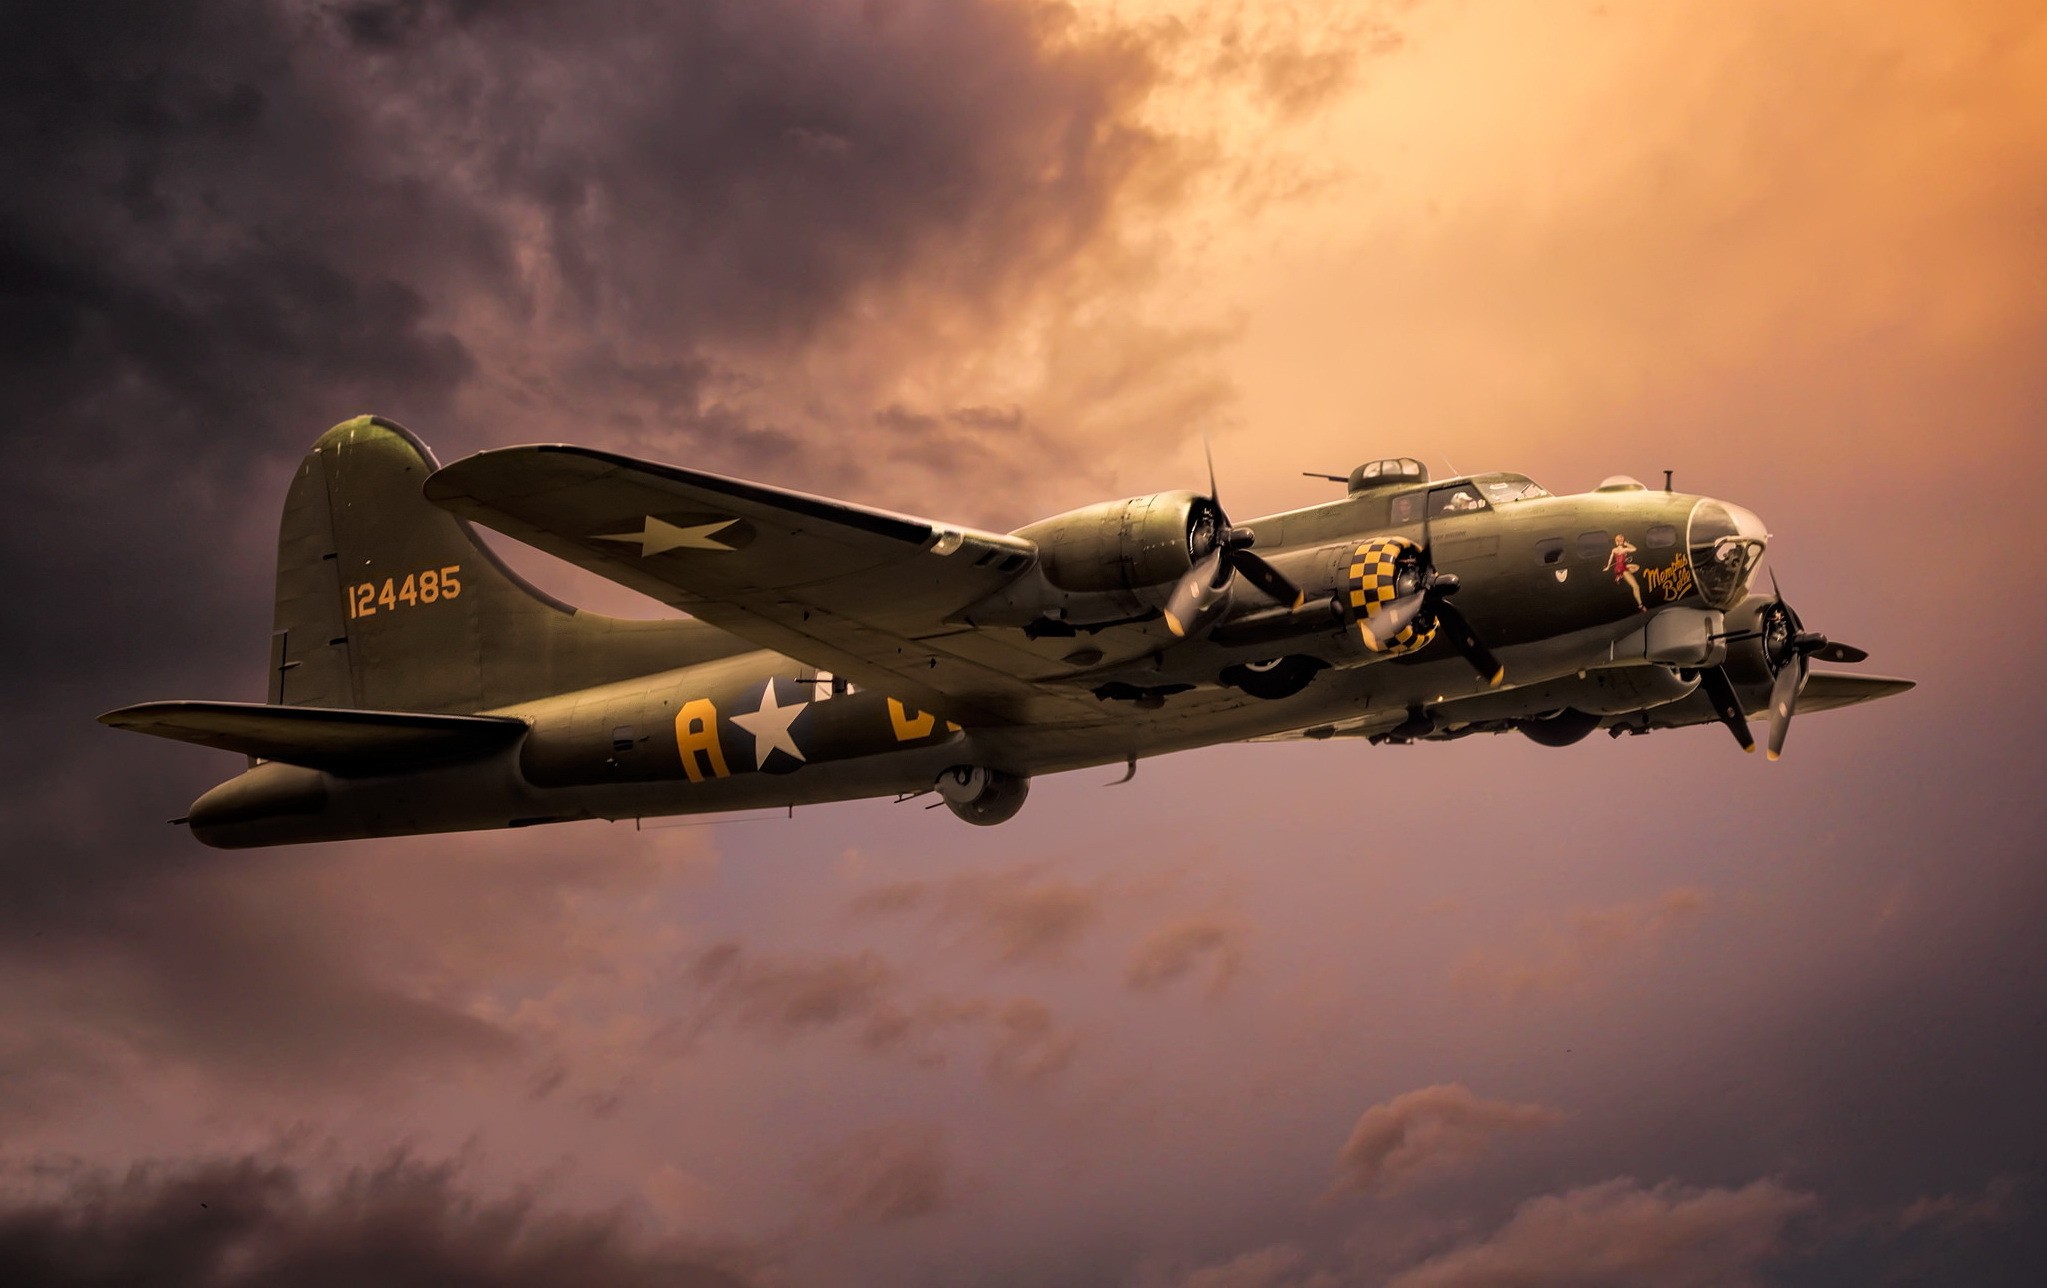 Aircraft Boeing B 17 Flying Fortress Warplane Bomber Air Force Airplane 2047x1288